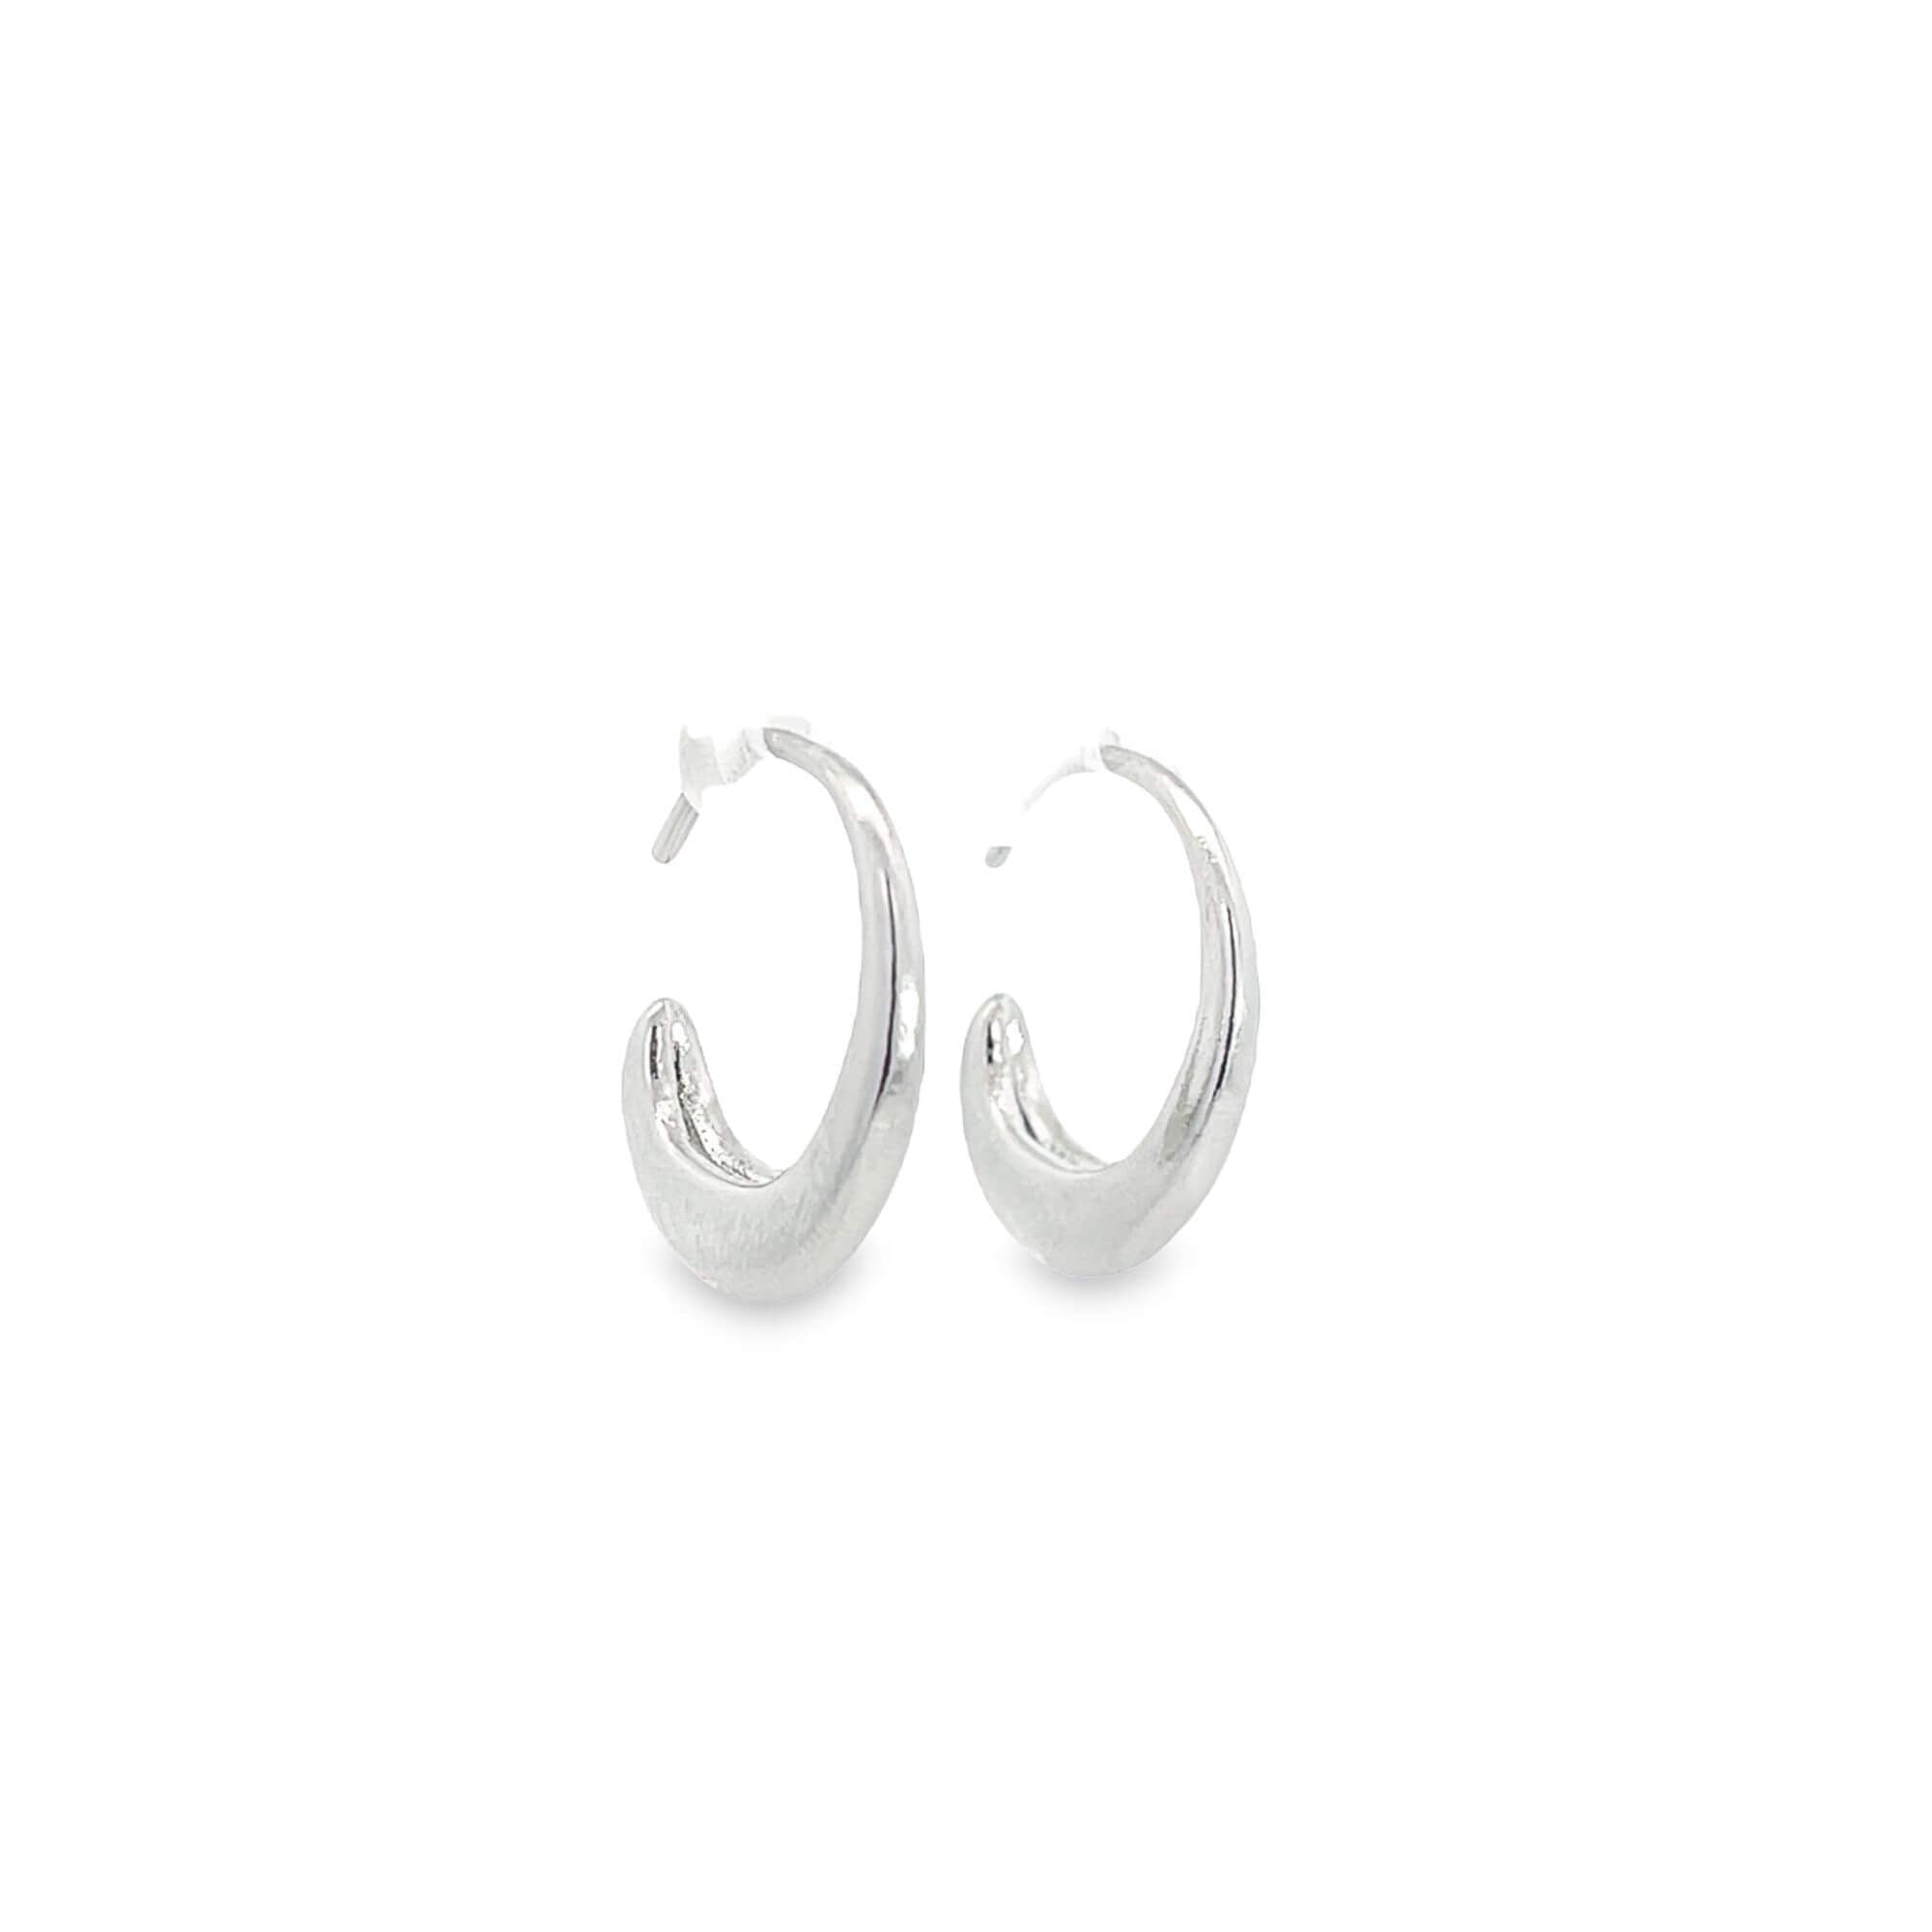 Small Oval Crescent Shaped Earrings (L469)